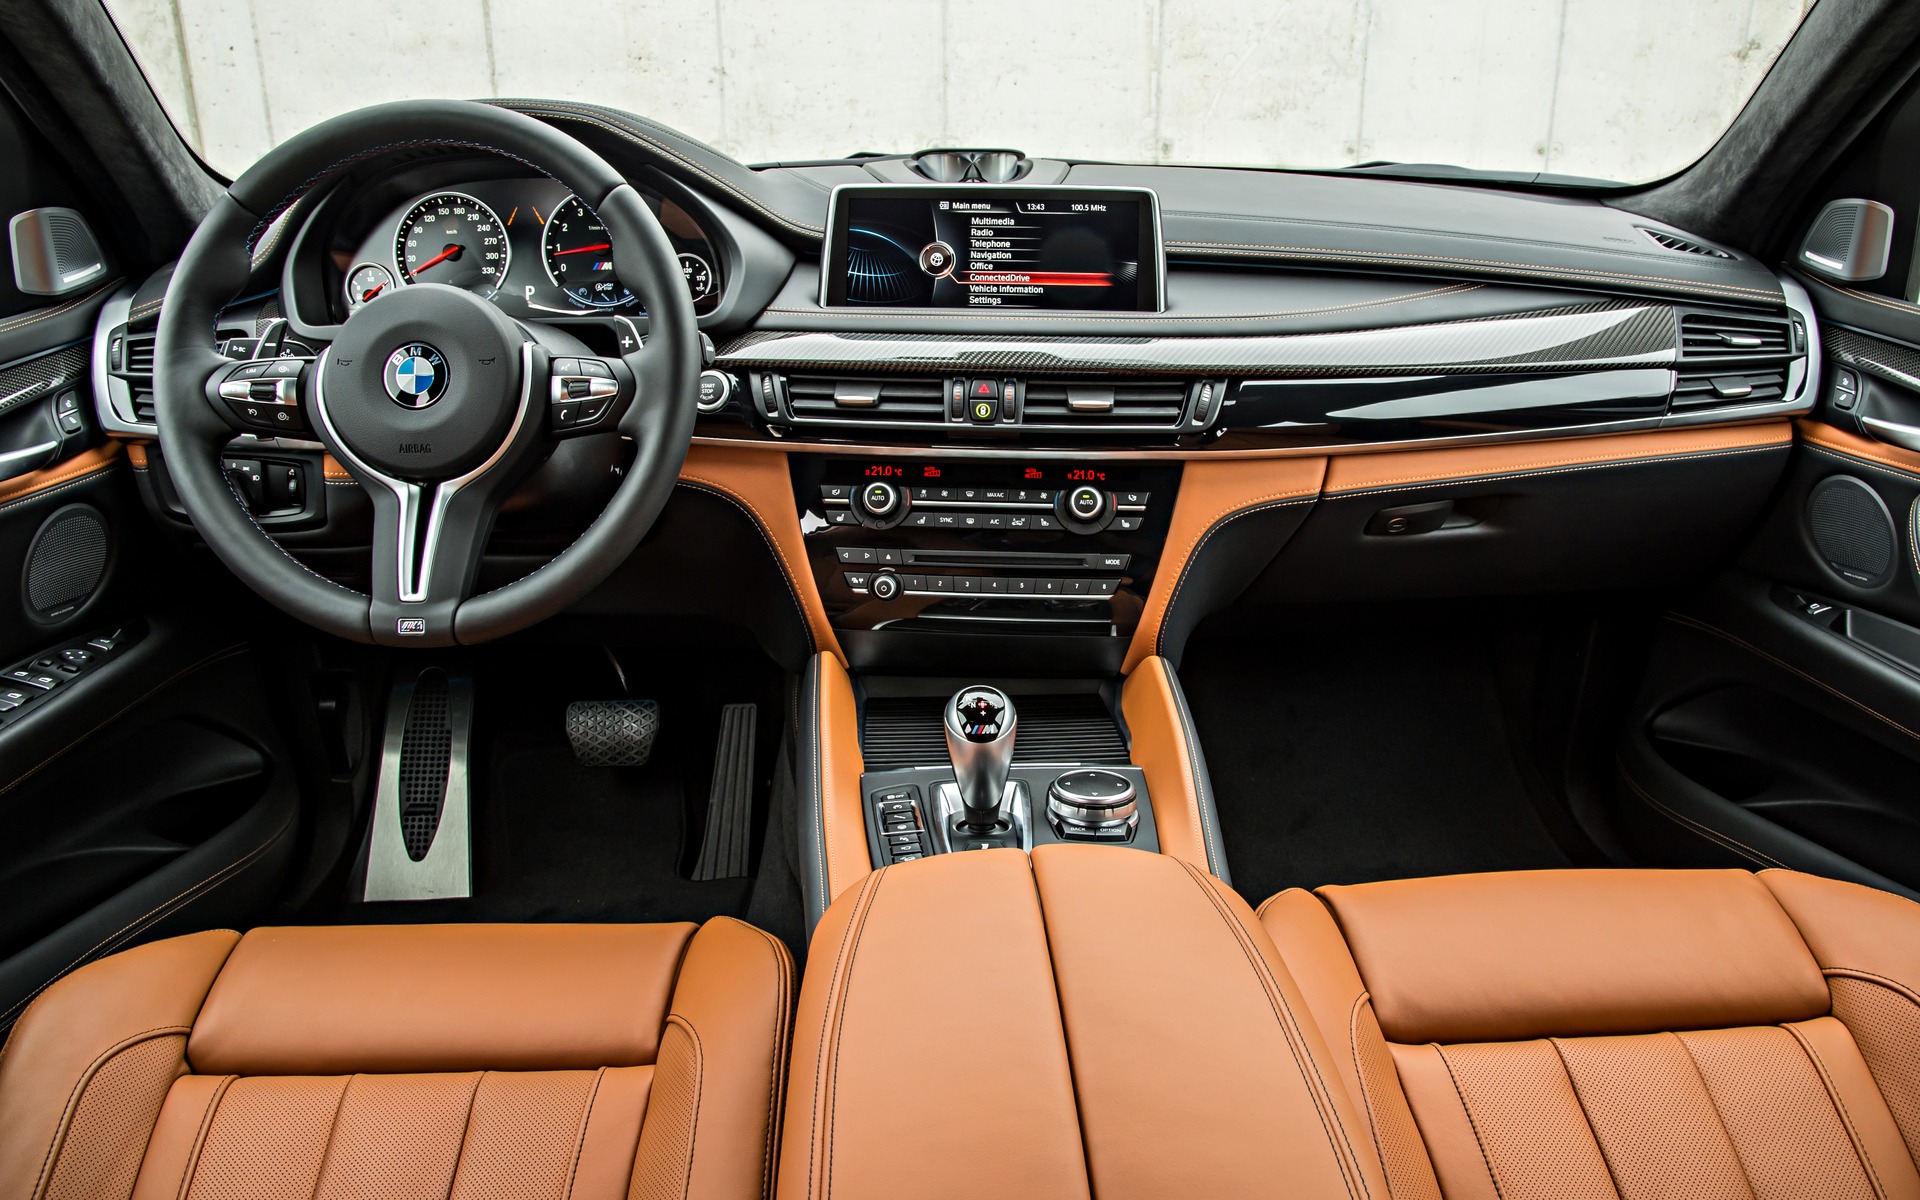 The X6 M's interior is exceptionally well executed.